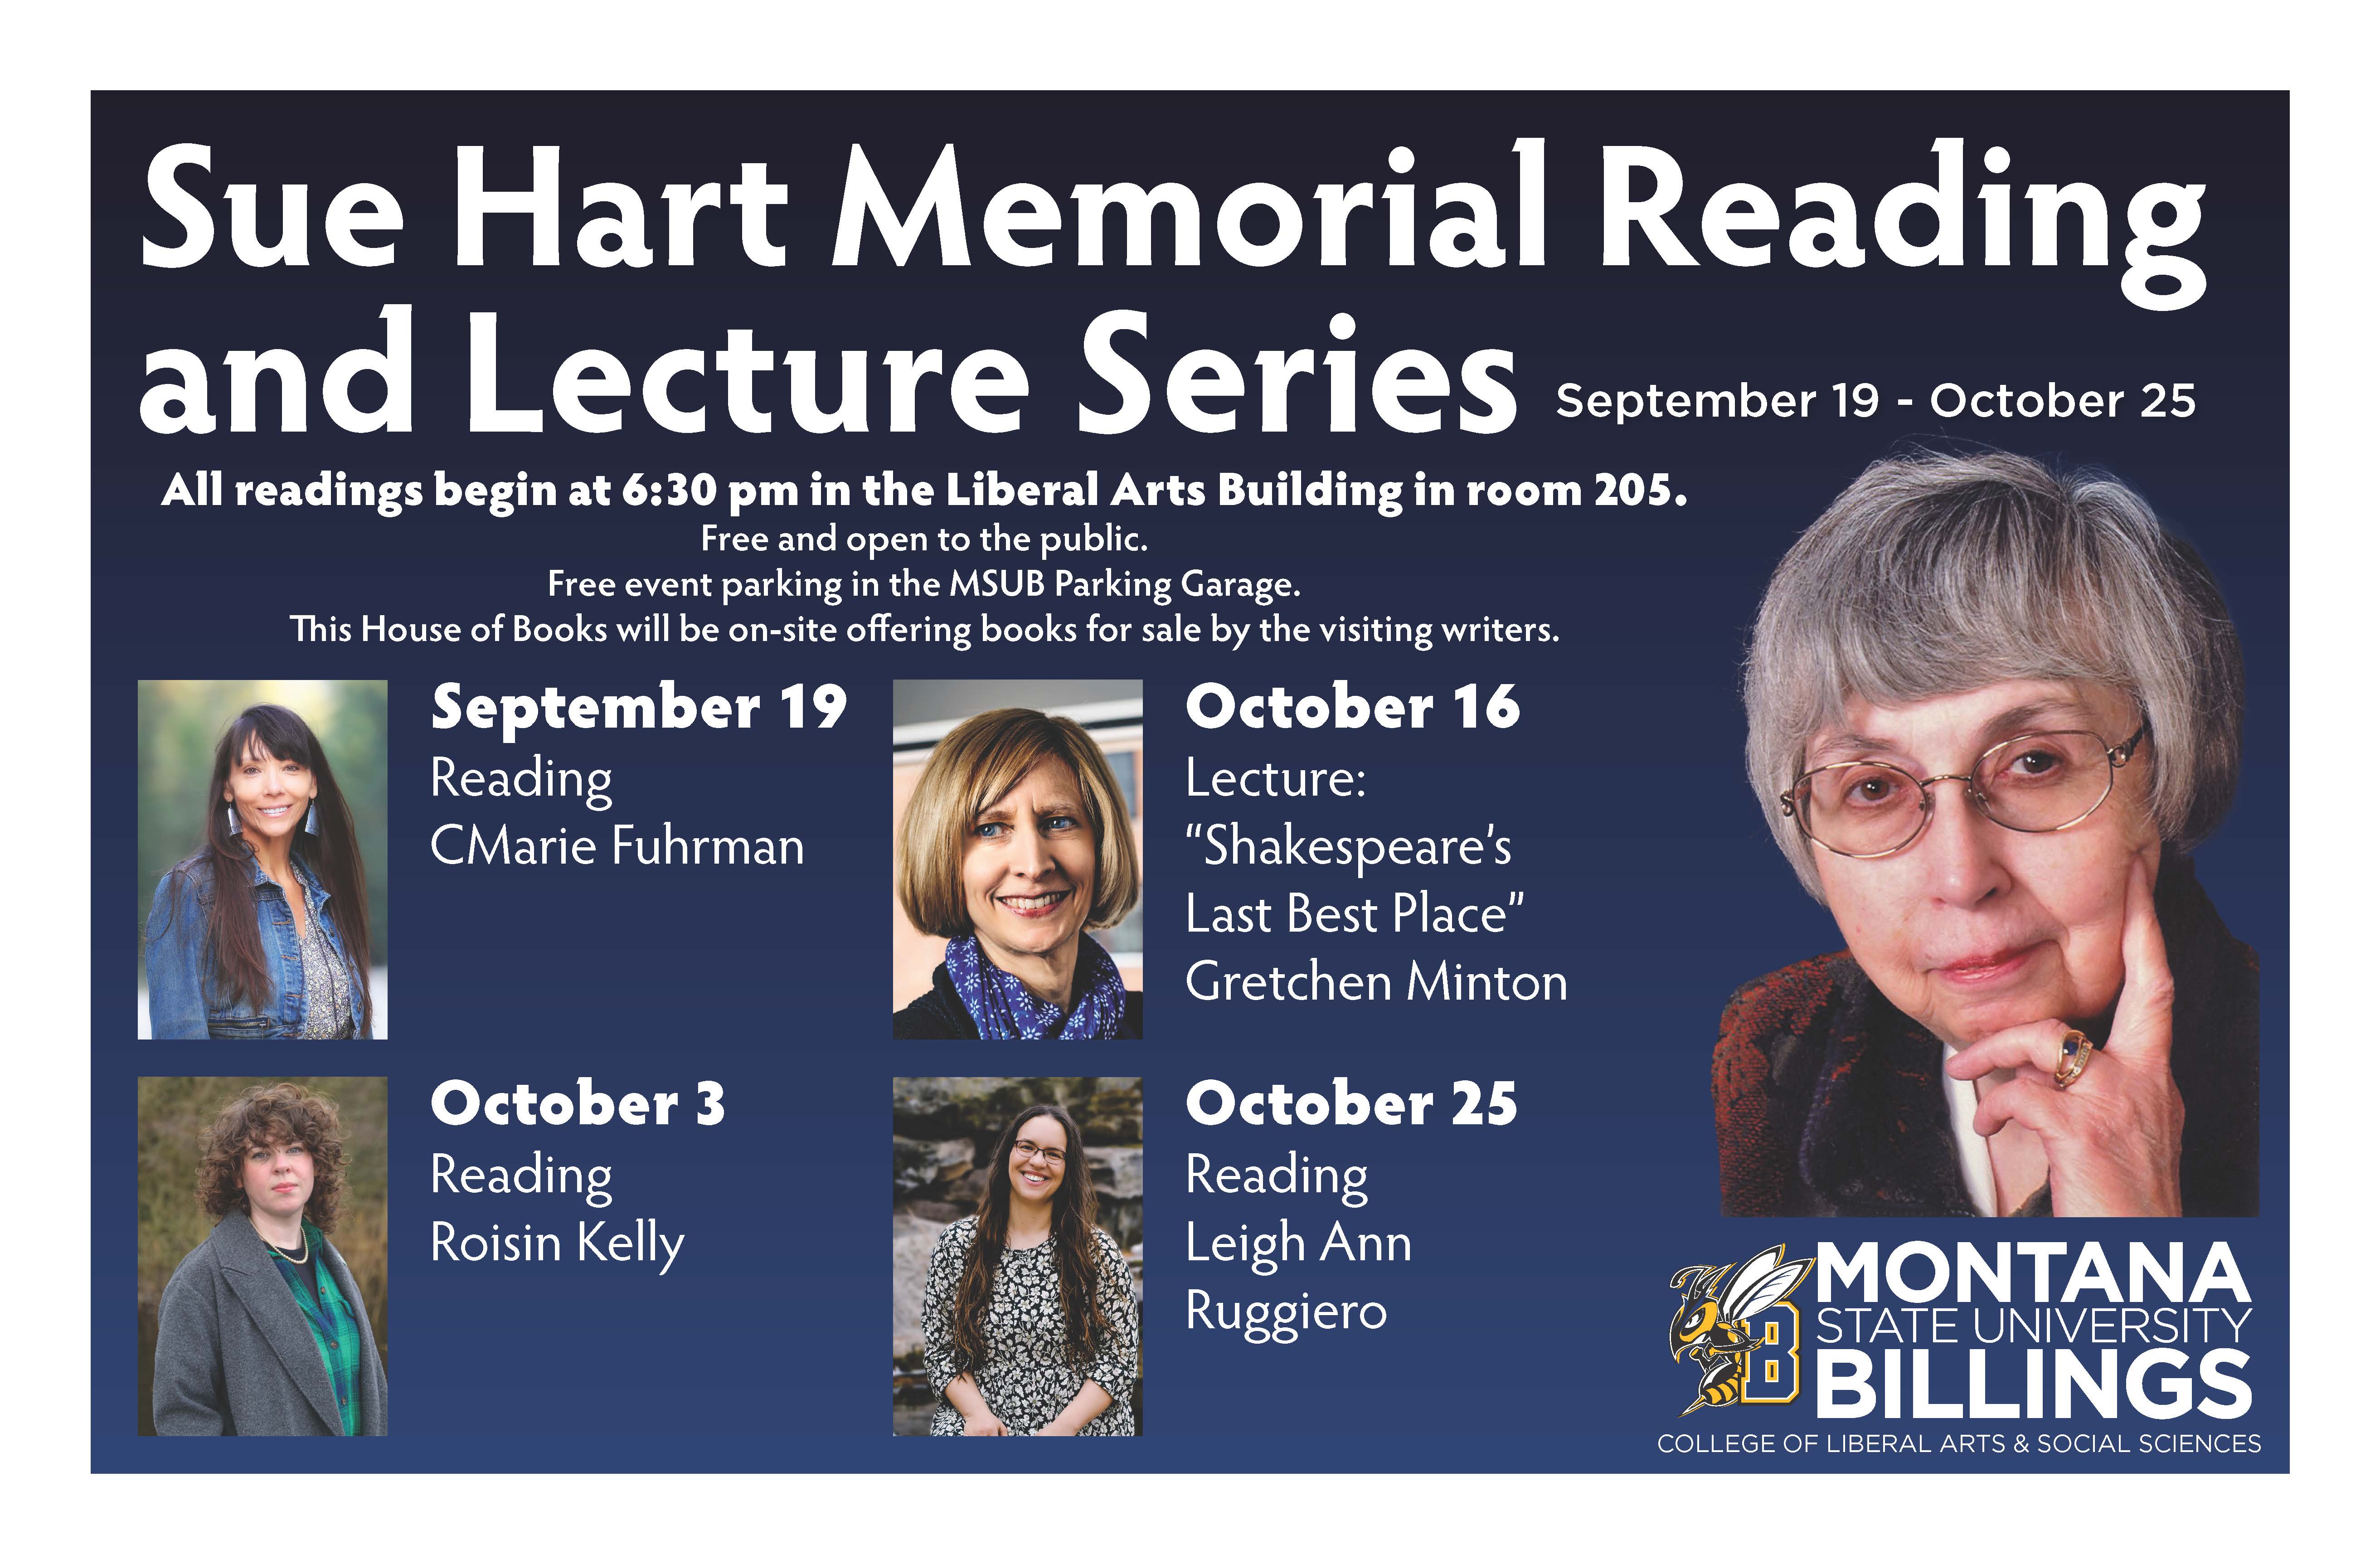 Sue Hart Memorial Reading and Lecture Series Series poster. September 19 - October 25. All reading begin at 6:30pm in the Liberal Arts Building in room 205. Free and open to the public. Free event parking in the MSUB Parking Garage. This House of Books will be on-site offering books for sale by the visiting writers. September 19, reading, CMarie Fuhrman. October 3, reading, Roisin Kelly. October 16, lecture: "Shakespeare's Last Best Place", Gretchen Minton. October 25, reading, Leigh An Ruggiero. Montana State University Billings. College of Liberal Arts & Social Sciences.